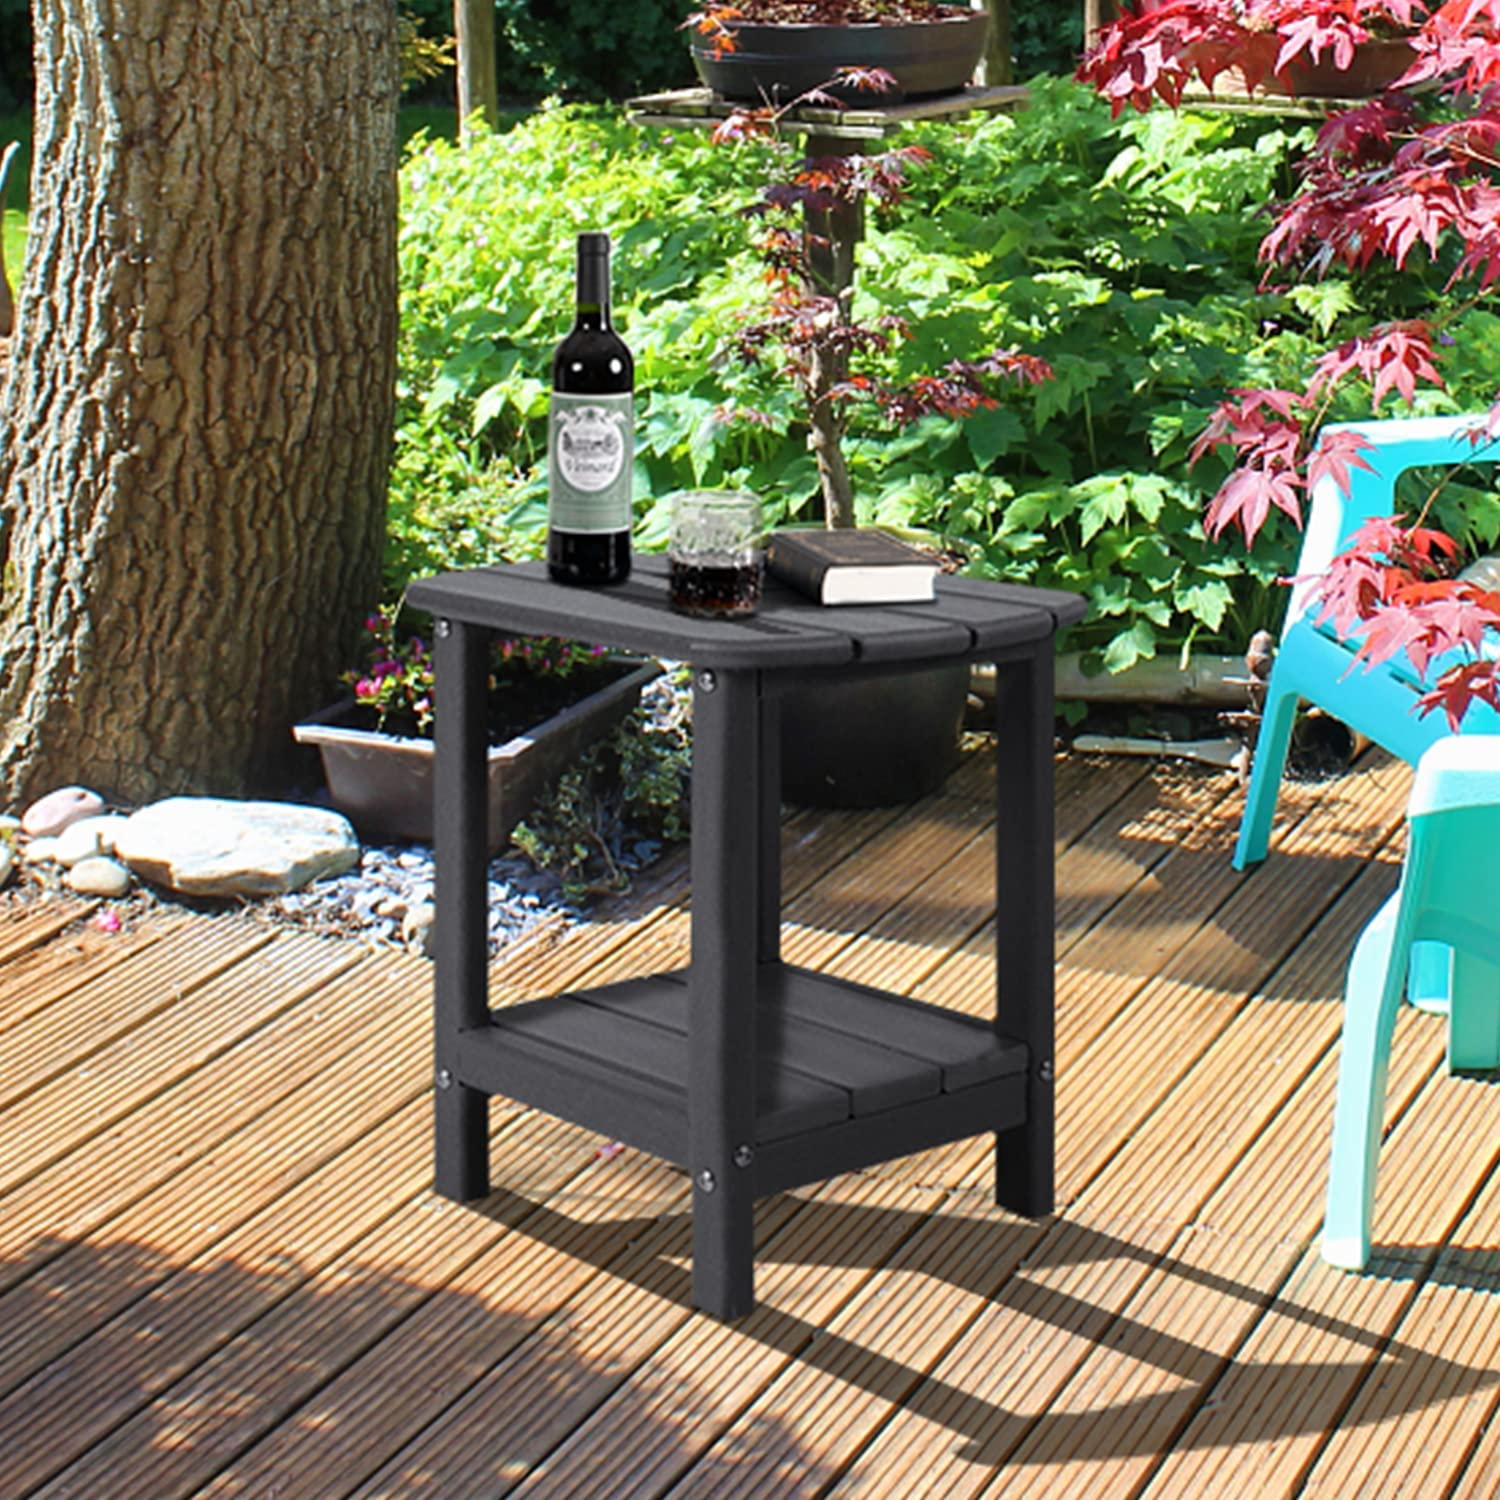 NALONE Adirondack Side Table 16.5" Outdoor Side Table HDPE Plastic Double Adirondack End Table Small Table for Patio (Black) - image 3 of 6